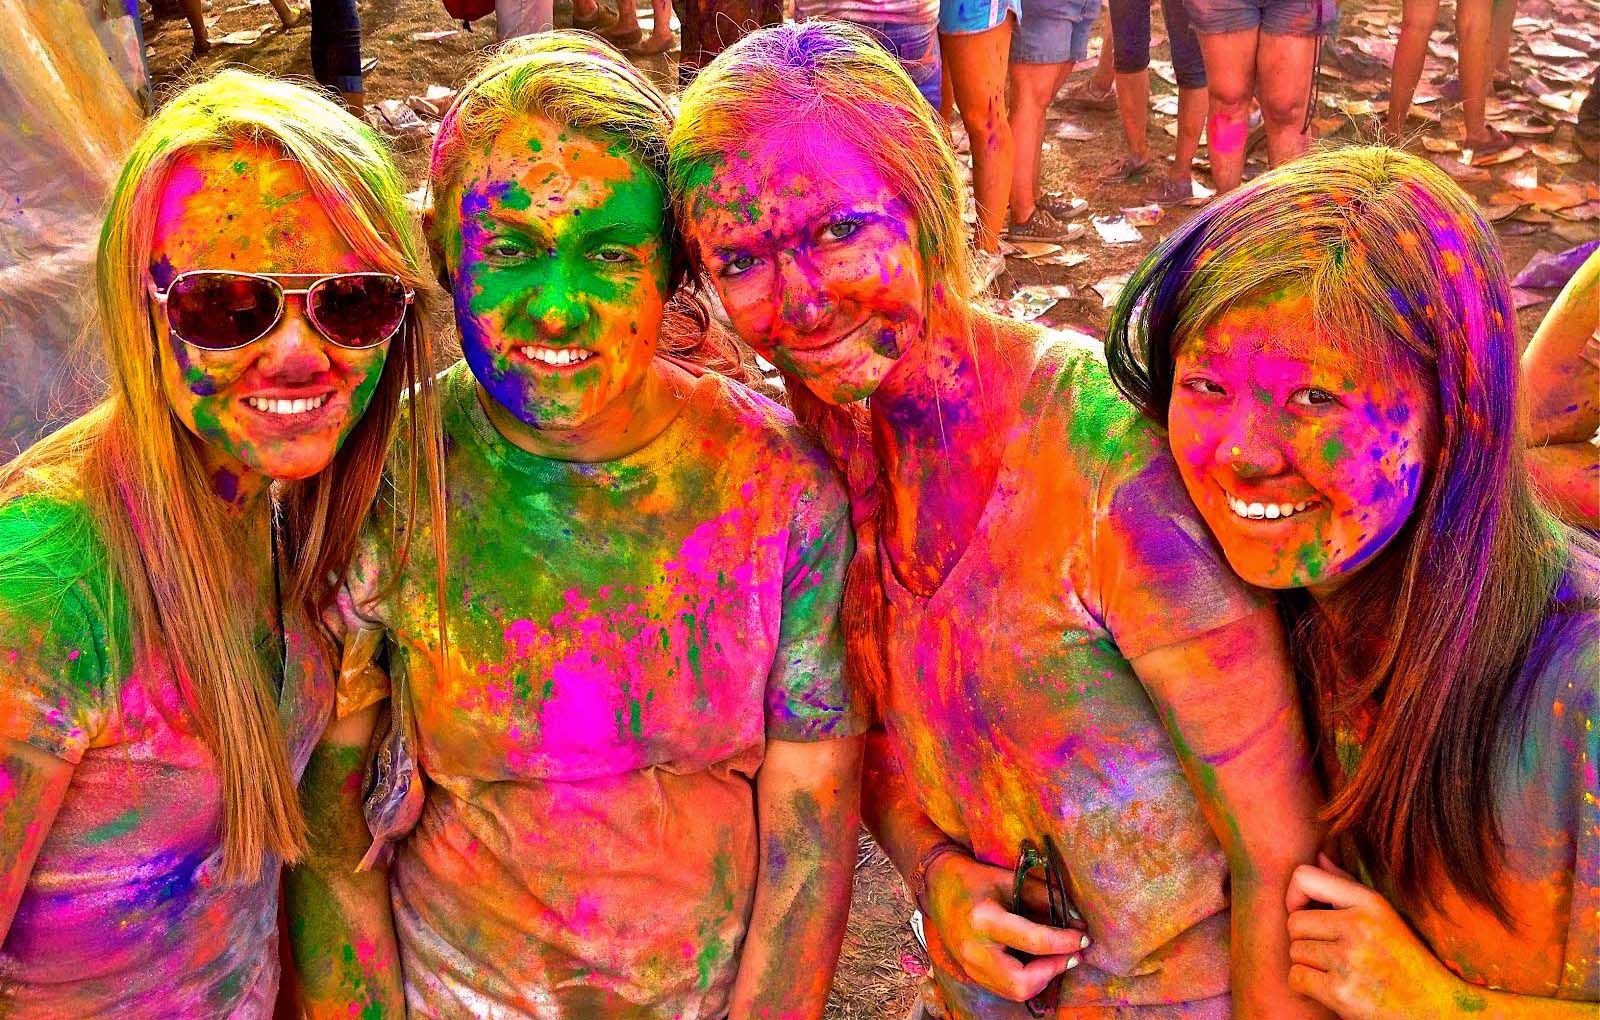 Top Places In India For Holi Celebration - Holi Festival India 2020 - HD Wallpaper 